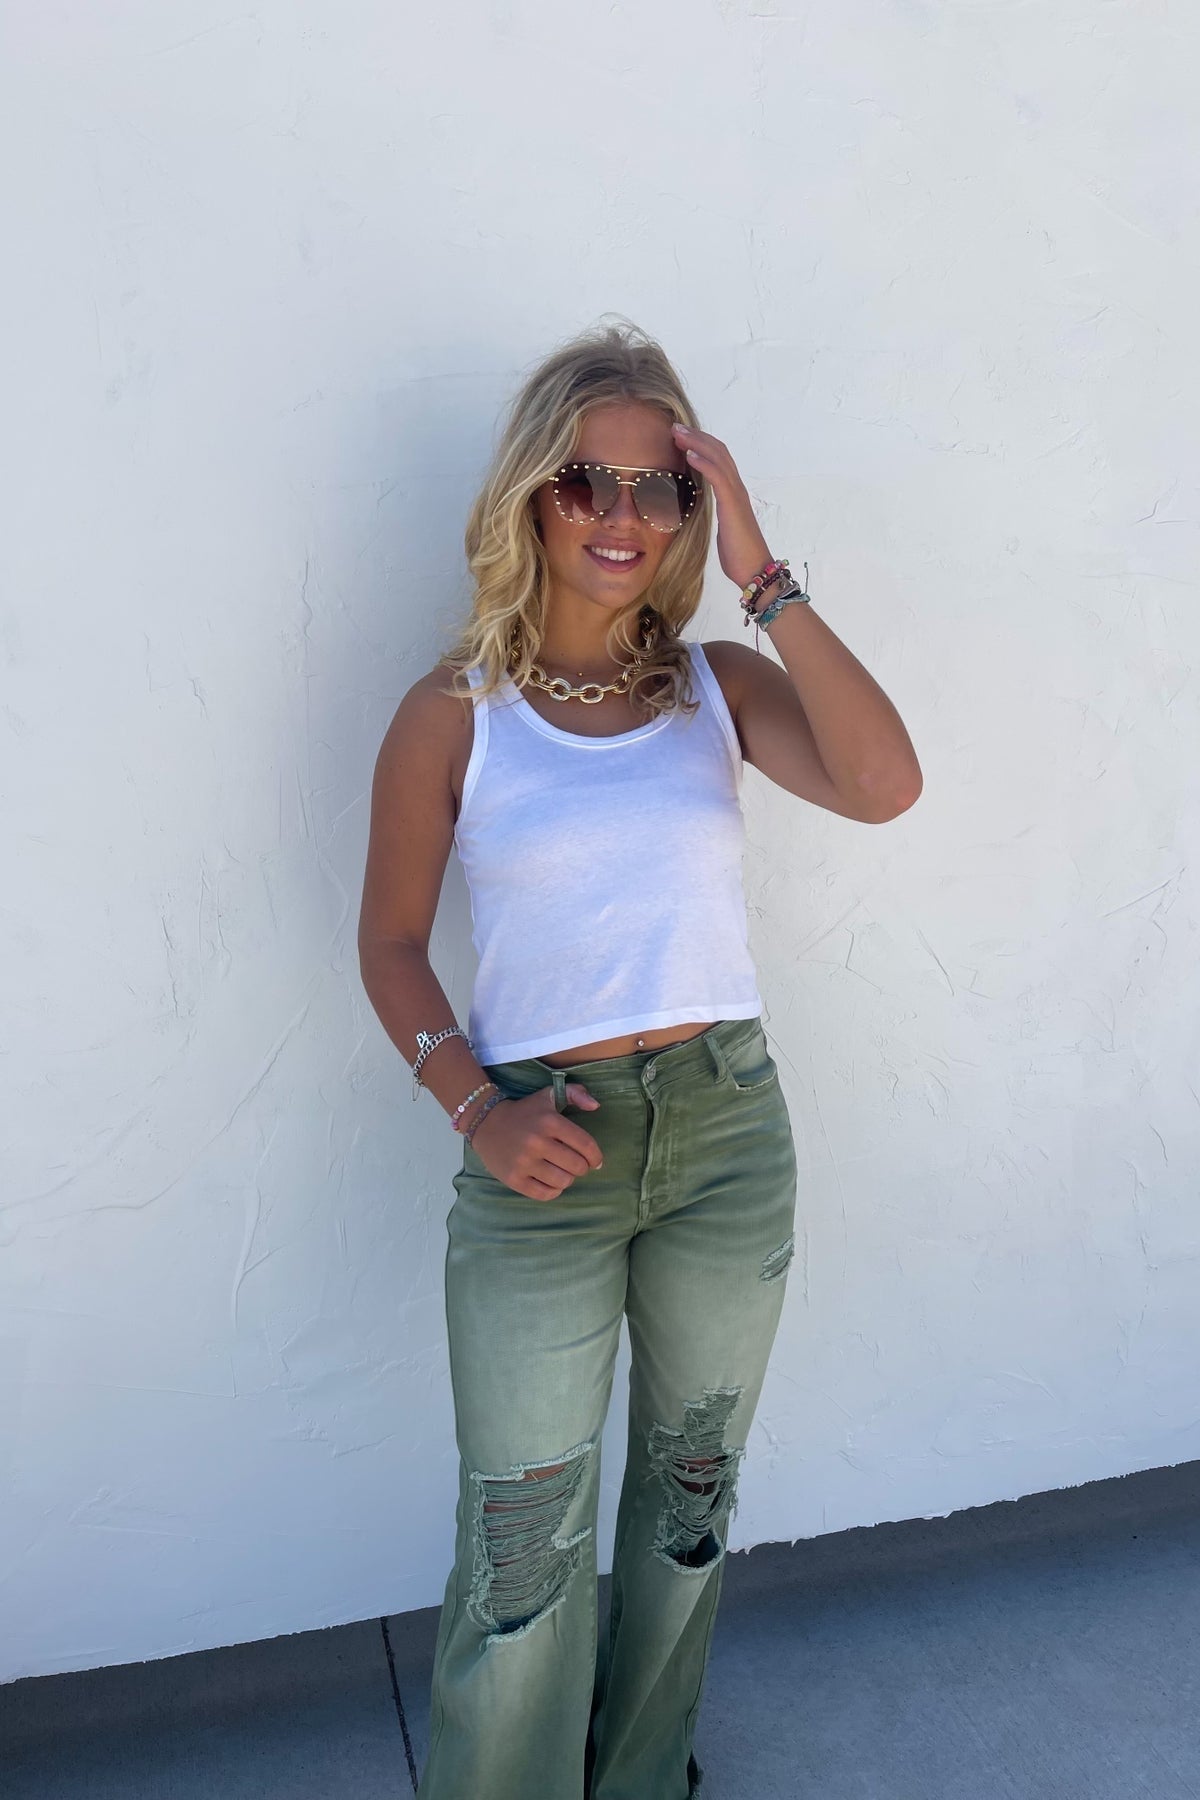 IN STOCK Blakeley Distressed Olive Jeans